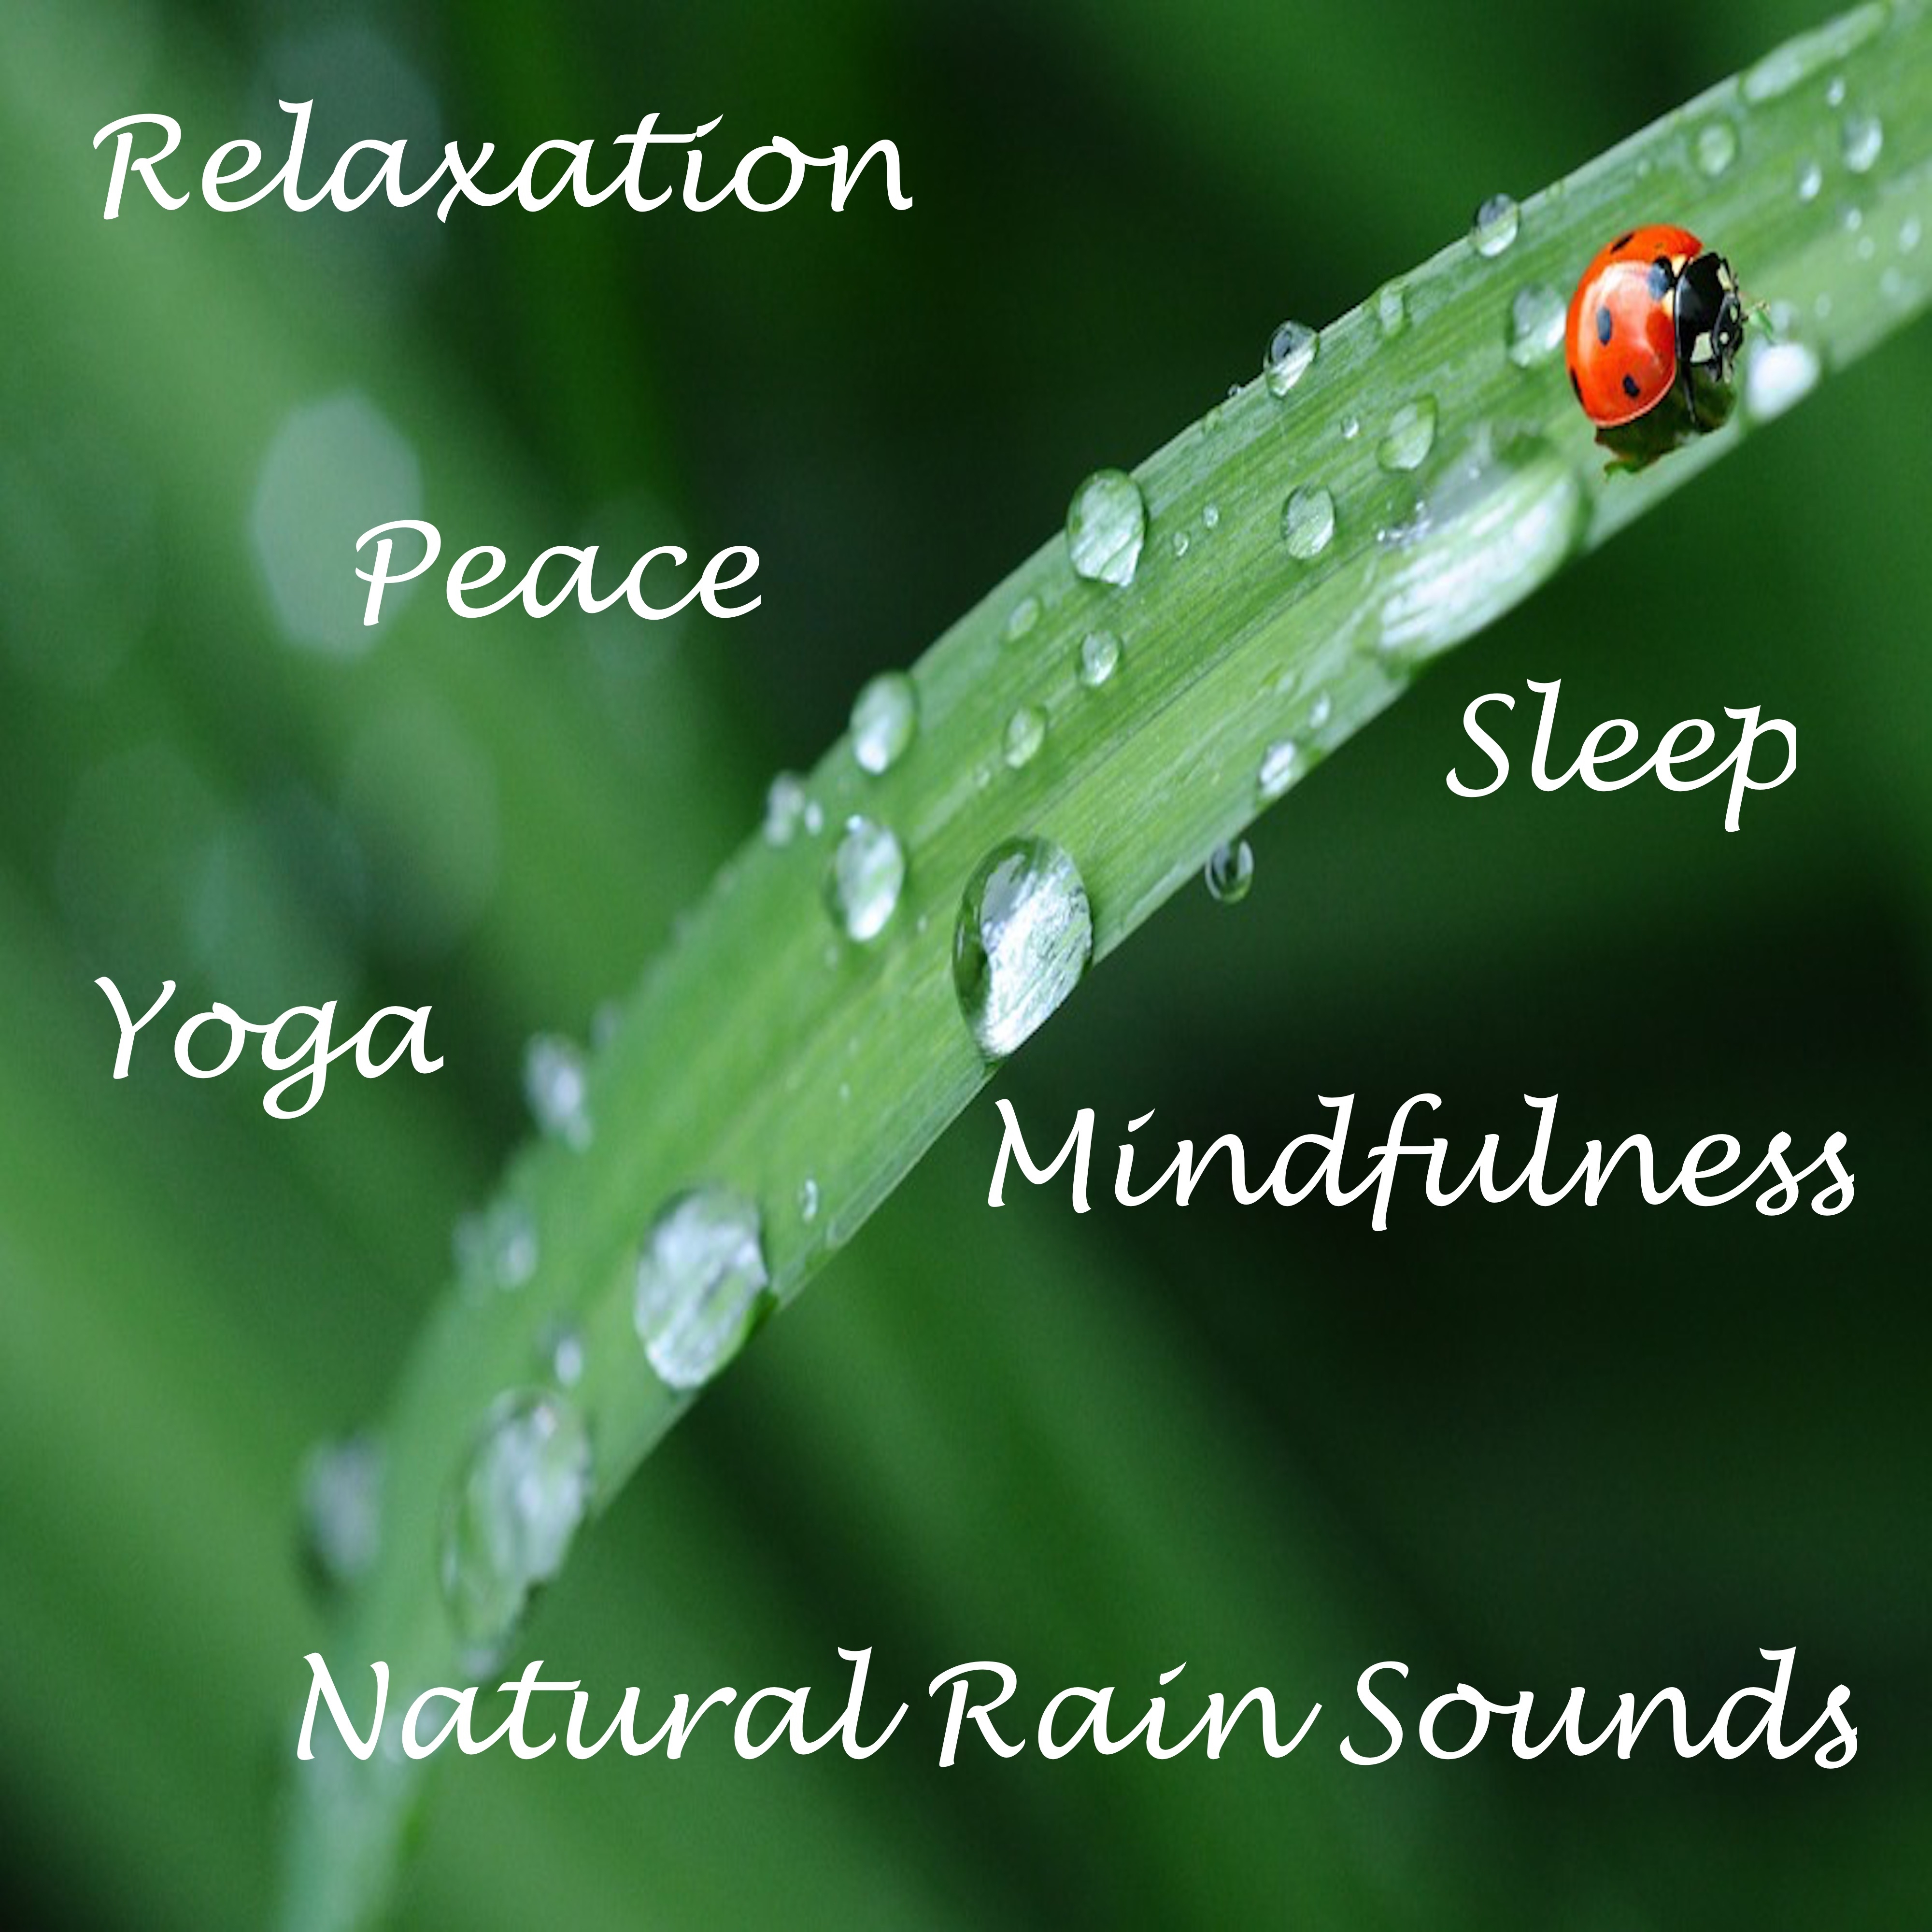 10 of the Best Natural Rain Sounds for Sleep and Wellbeing, Relaxation, Insomnia, Tinnitus and Mood Lifting